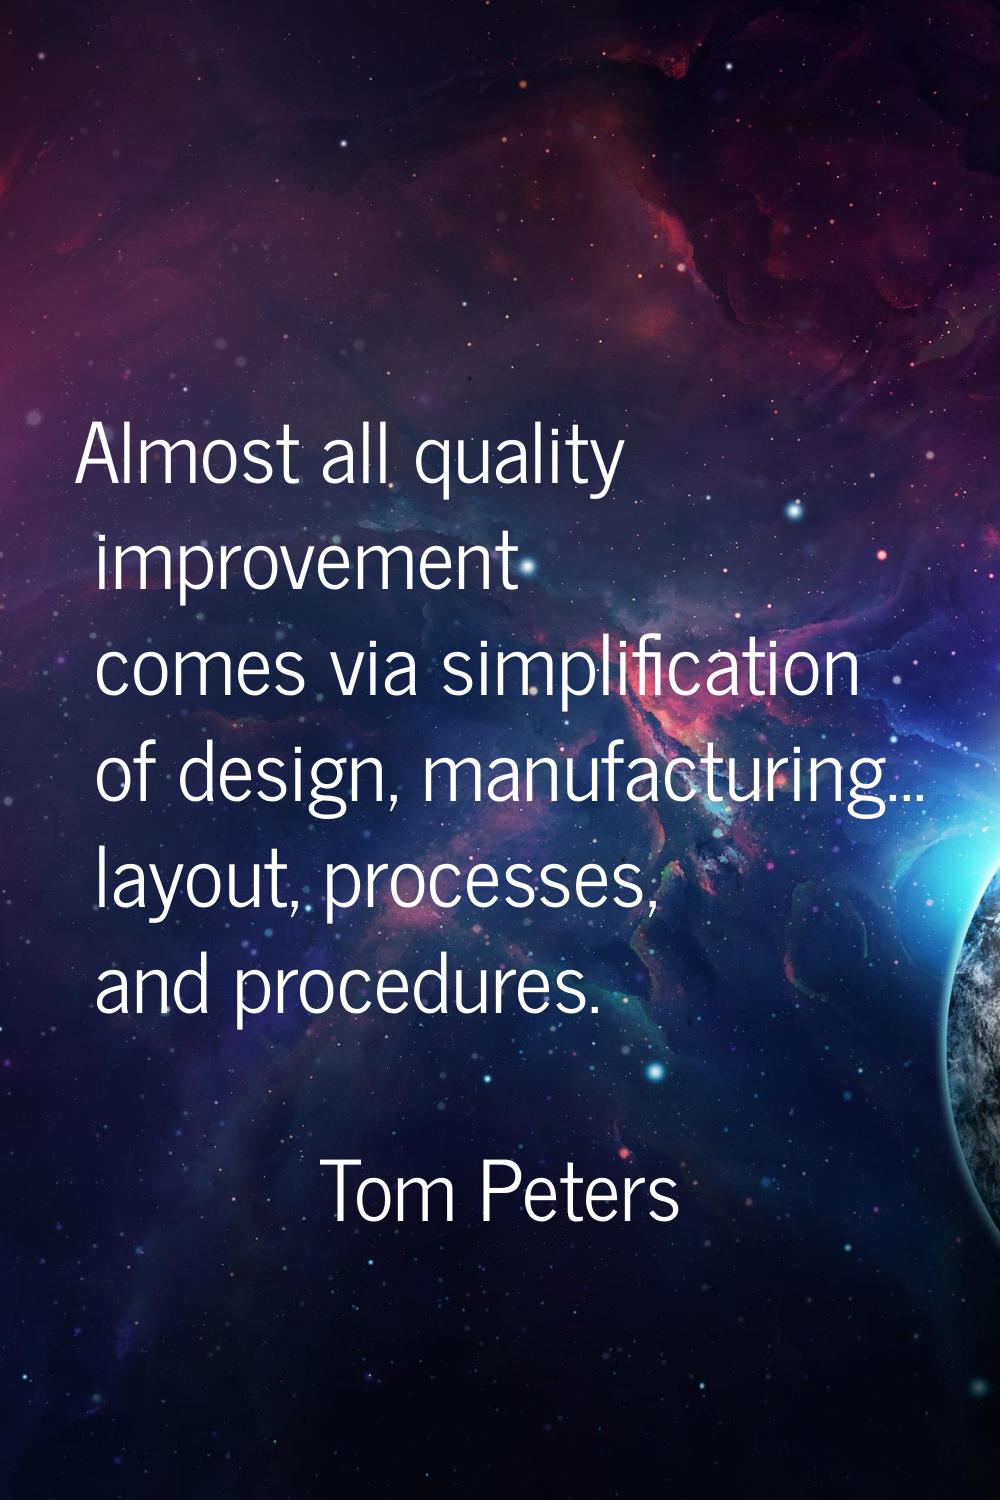 Almost all quality improvement comes via simplification of design, manufacturing... layout, process